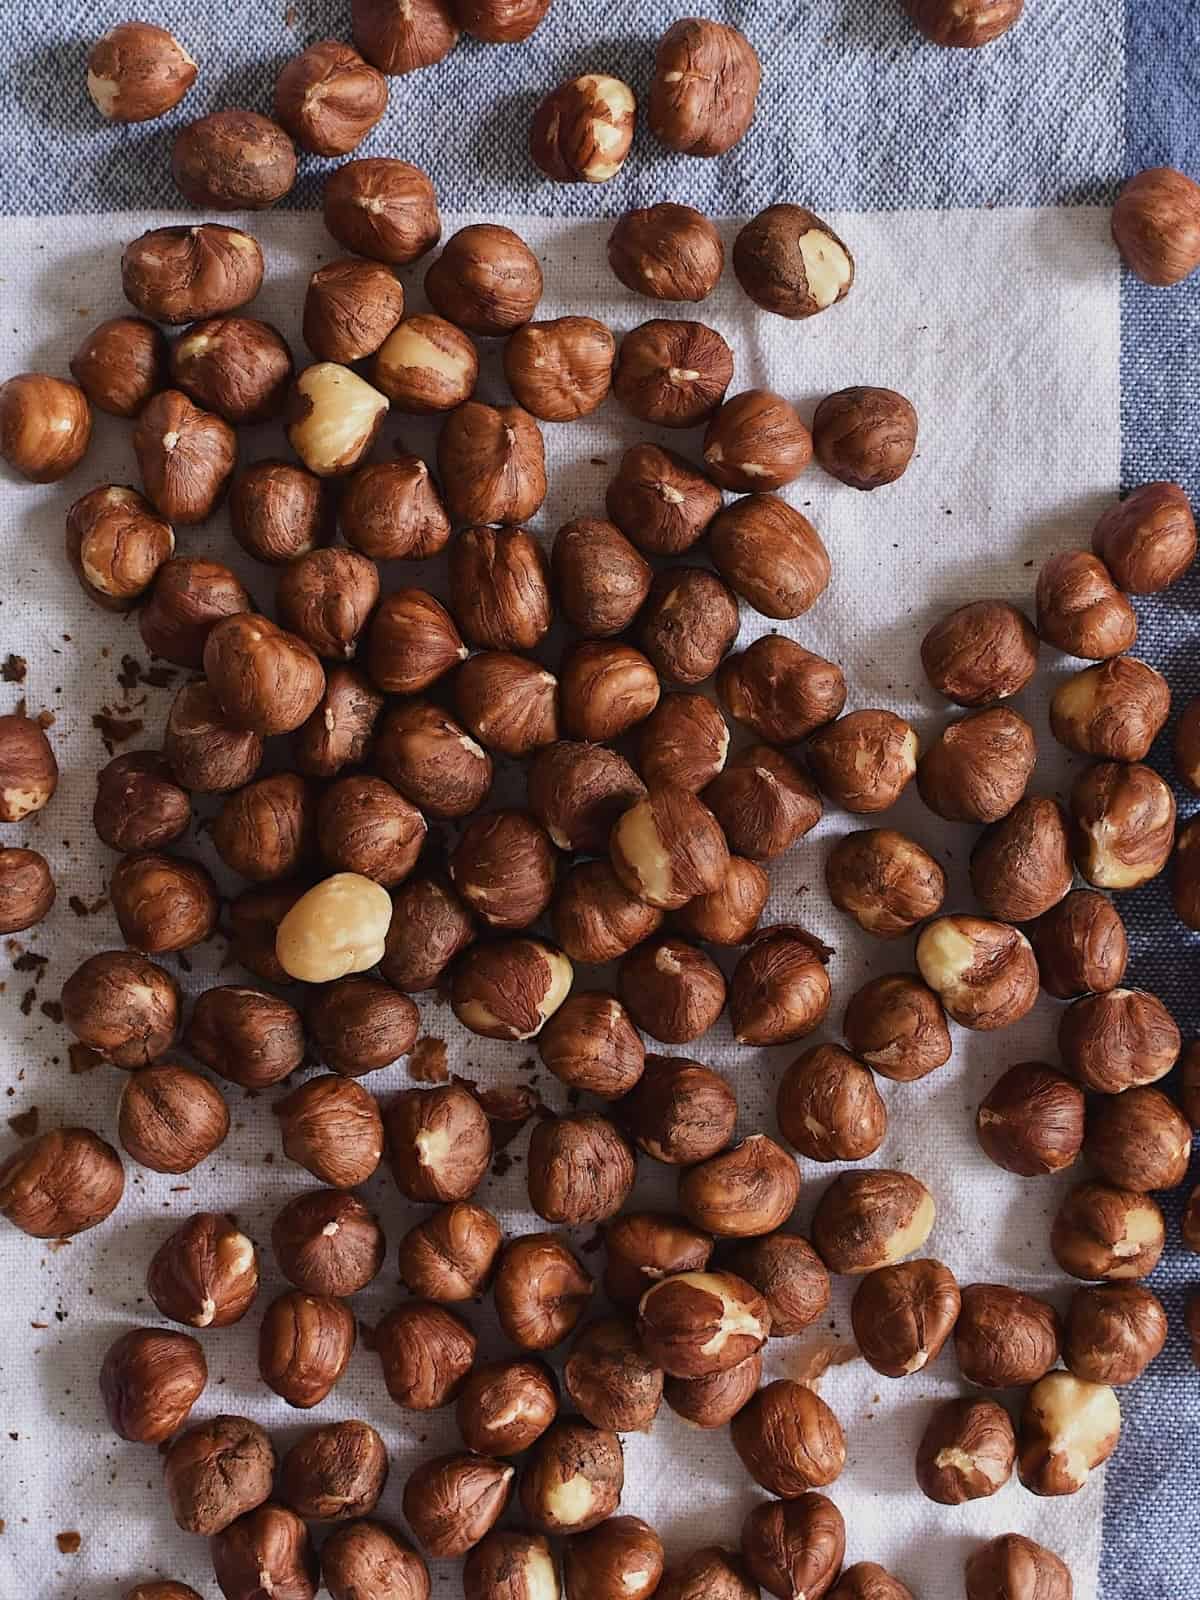 Hazelnuts on top of a table.